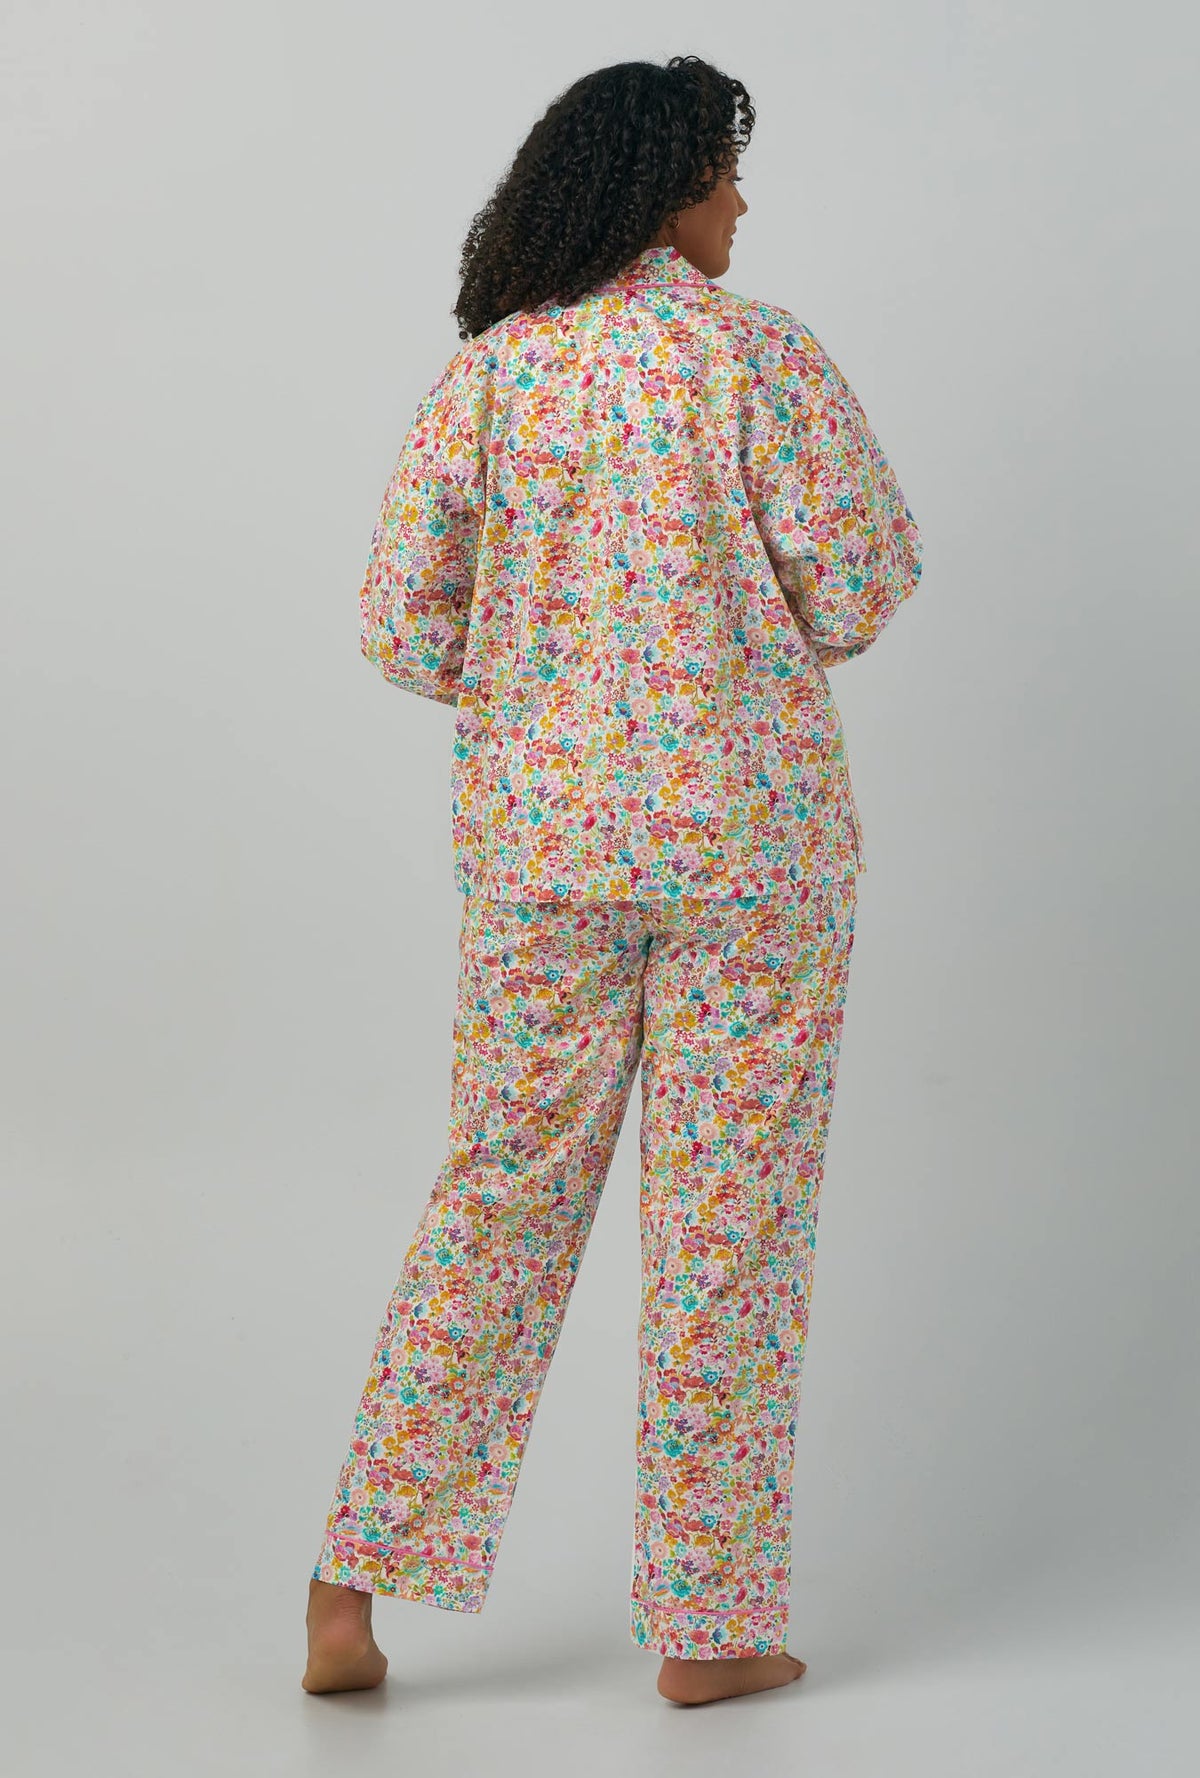 A lady wearing plus size Long Sleeve Classic Woven Cotton PJ Set with Classic Meadow print